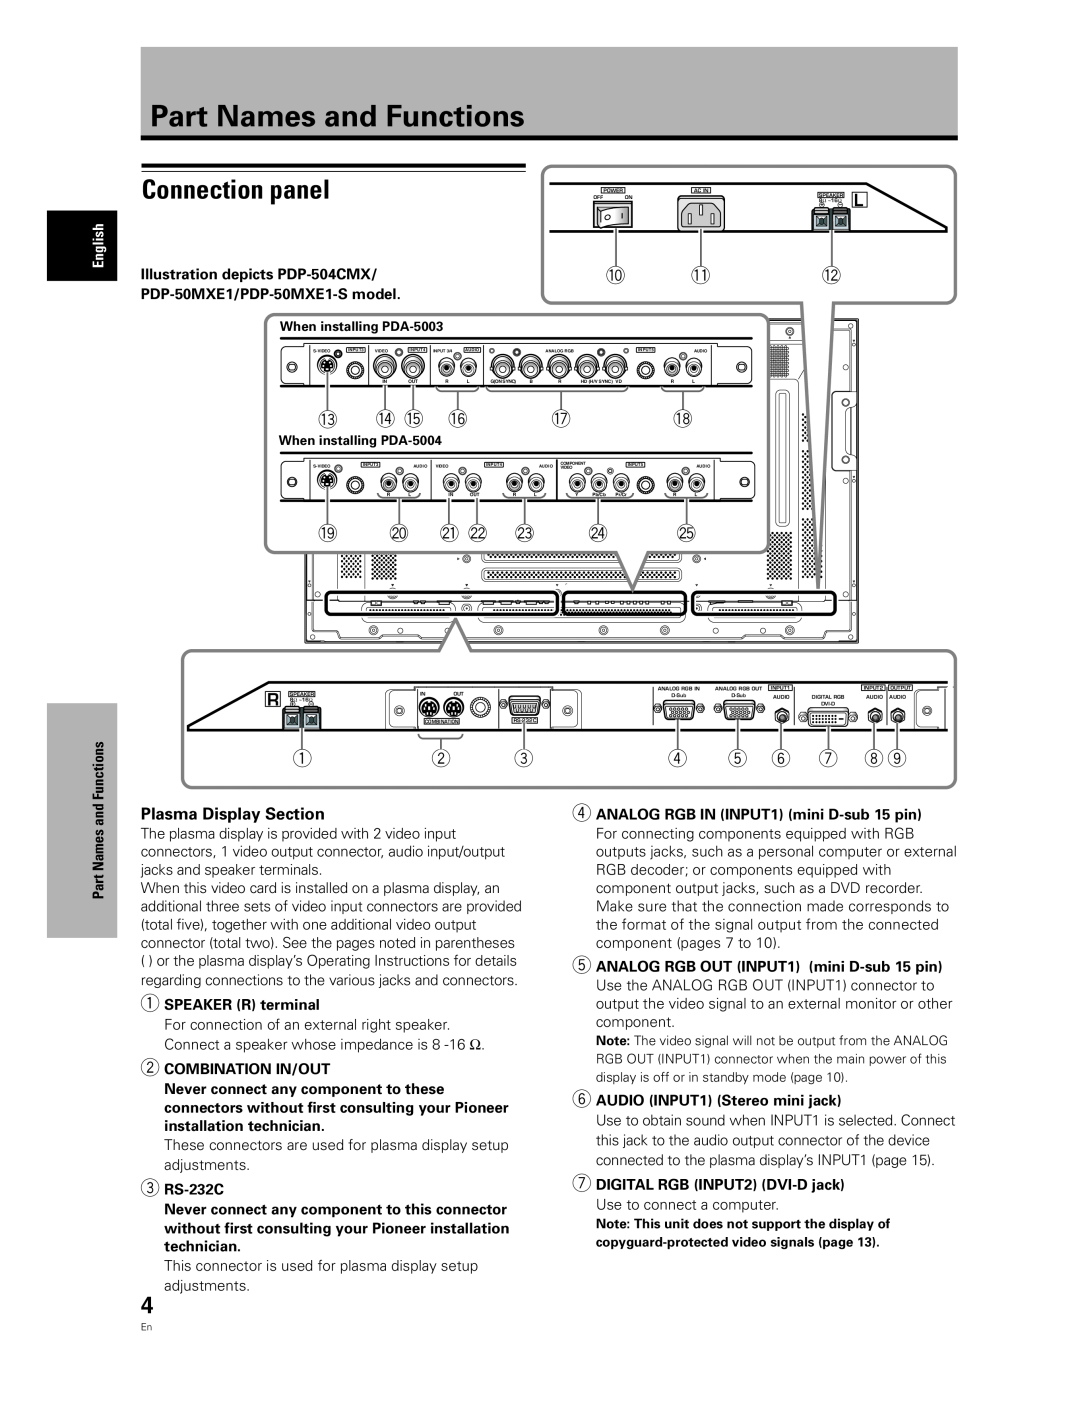 Pioneer PDA-5004 manual Part Names and Functions, Connection panel, Plasma Display Section, Illustration depicts PDP-504CMX 